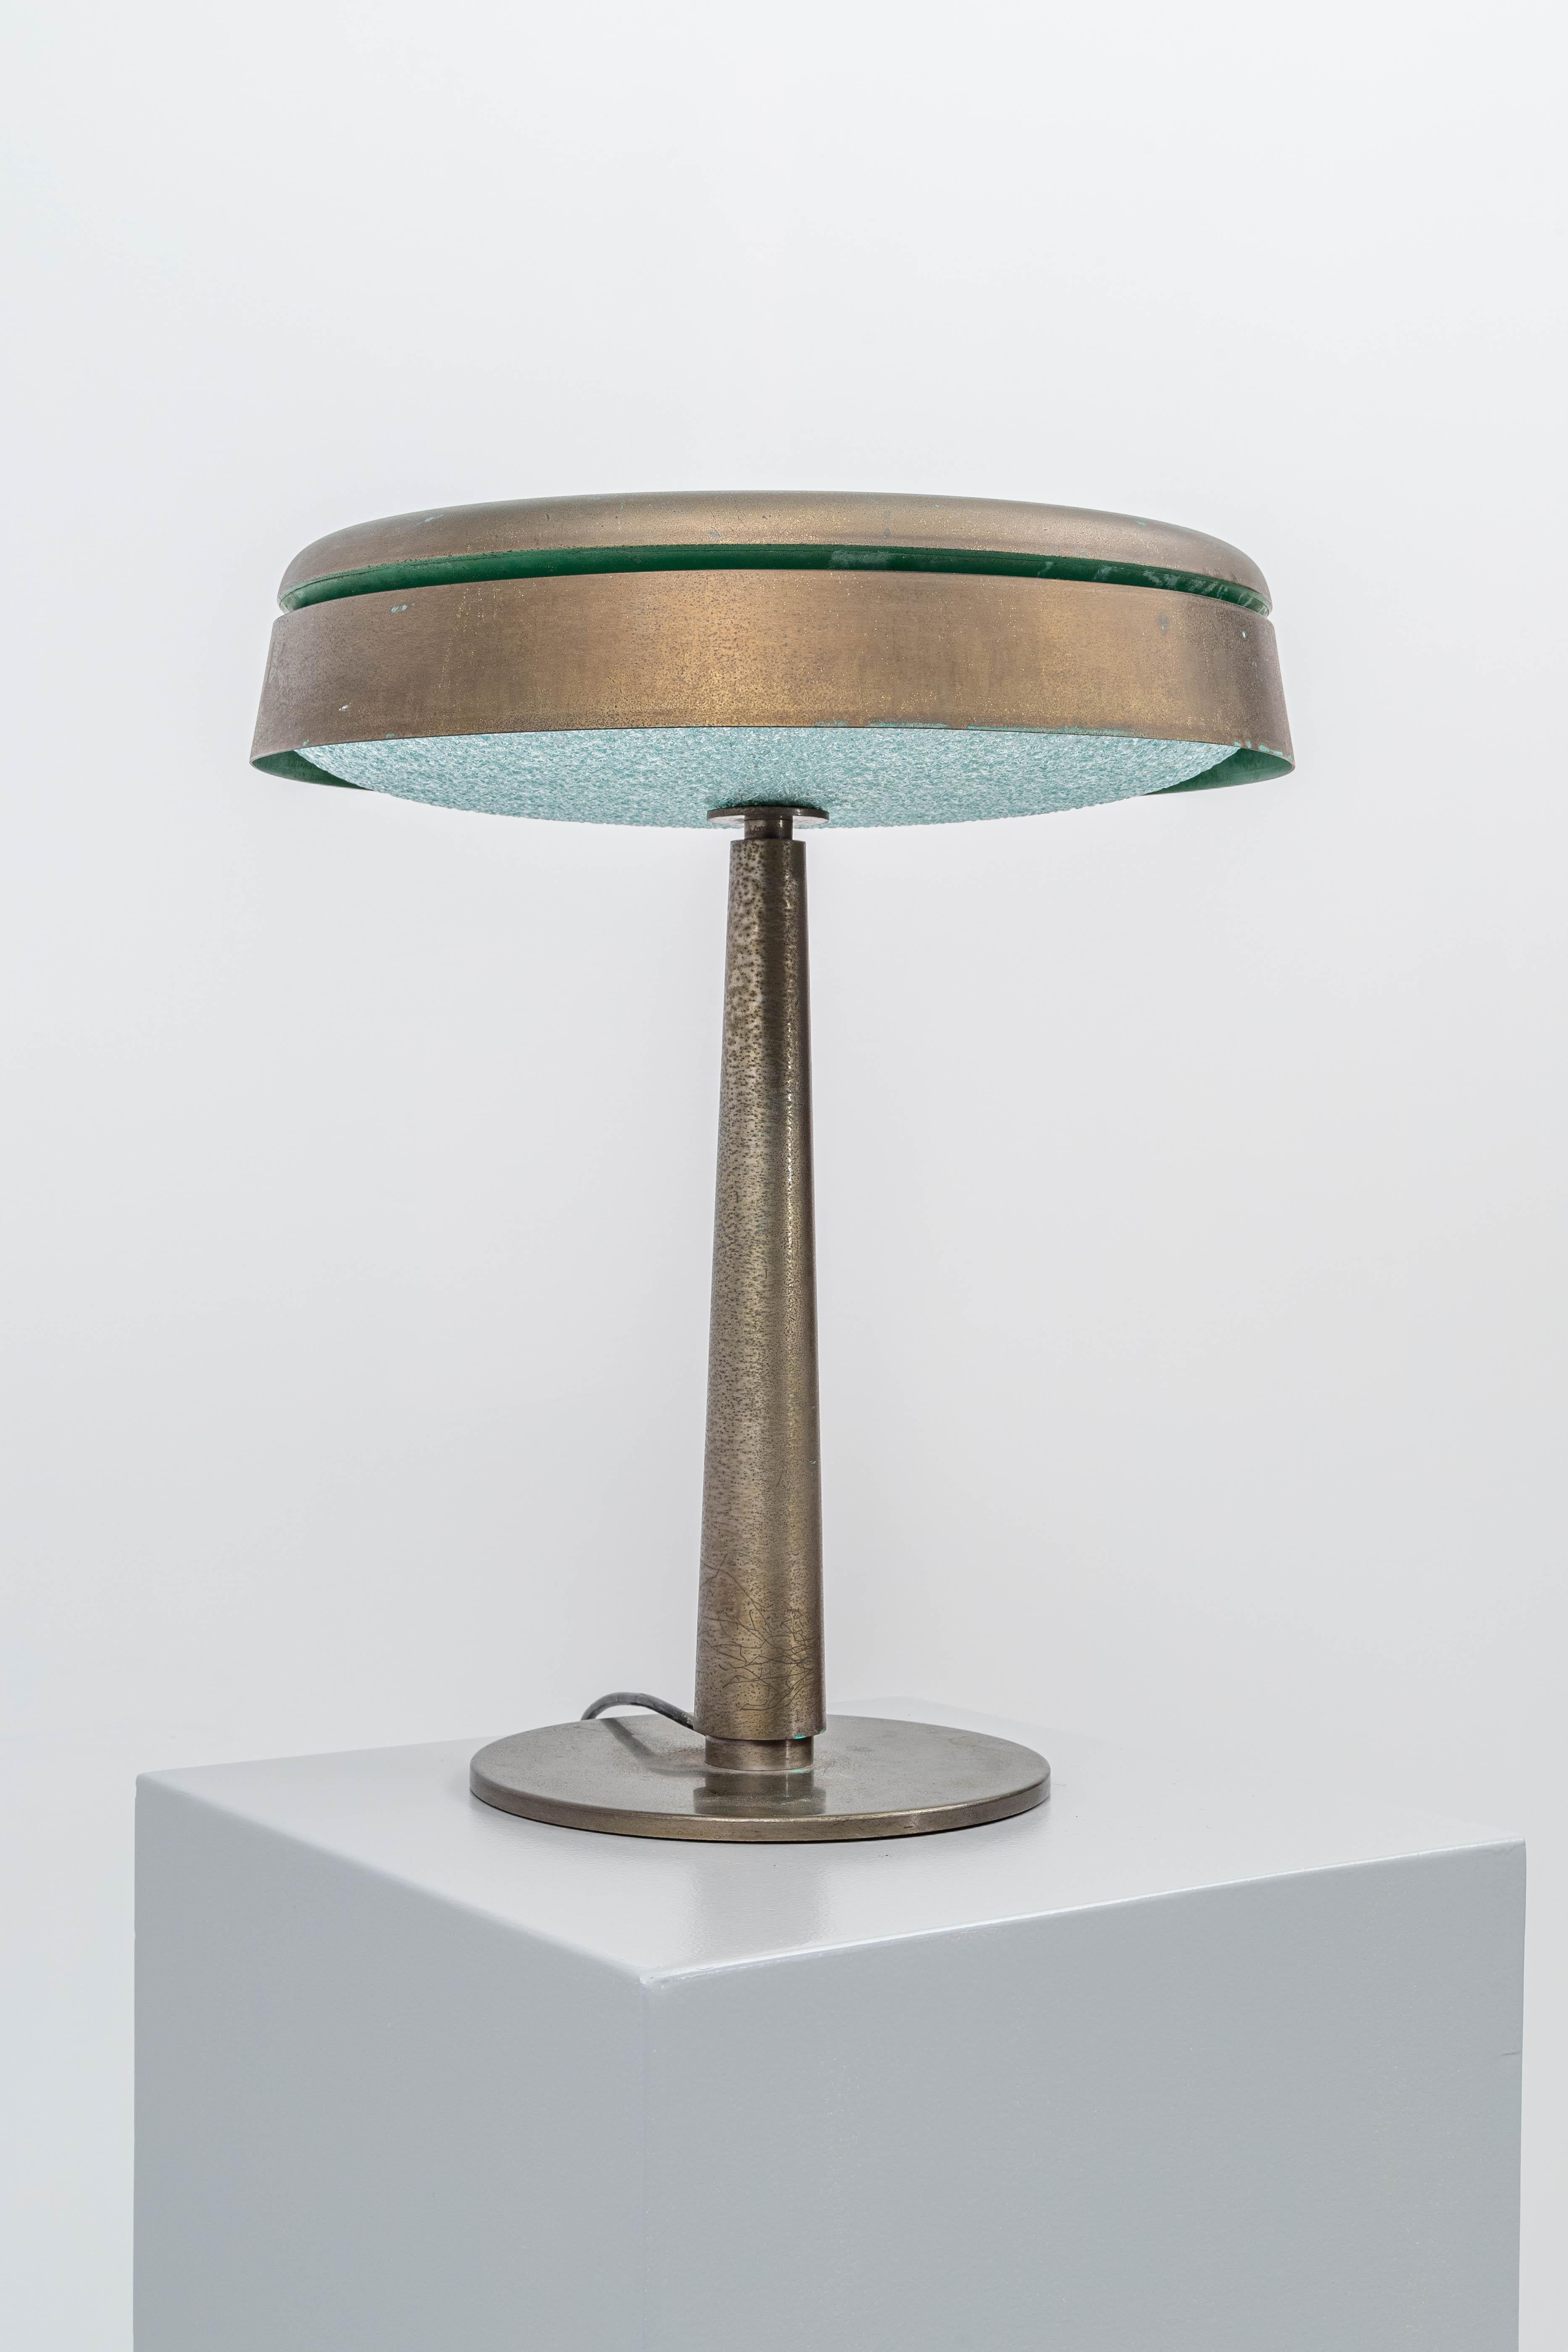 Mid-20th Century Max Ingrand Table Lamp #2278 for Fontana Arte, Italy, 1960 For Sale